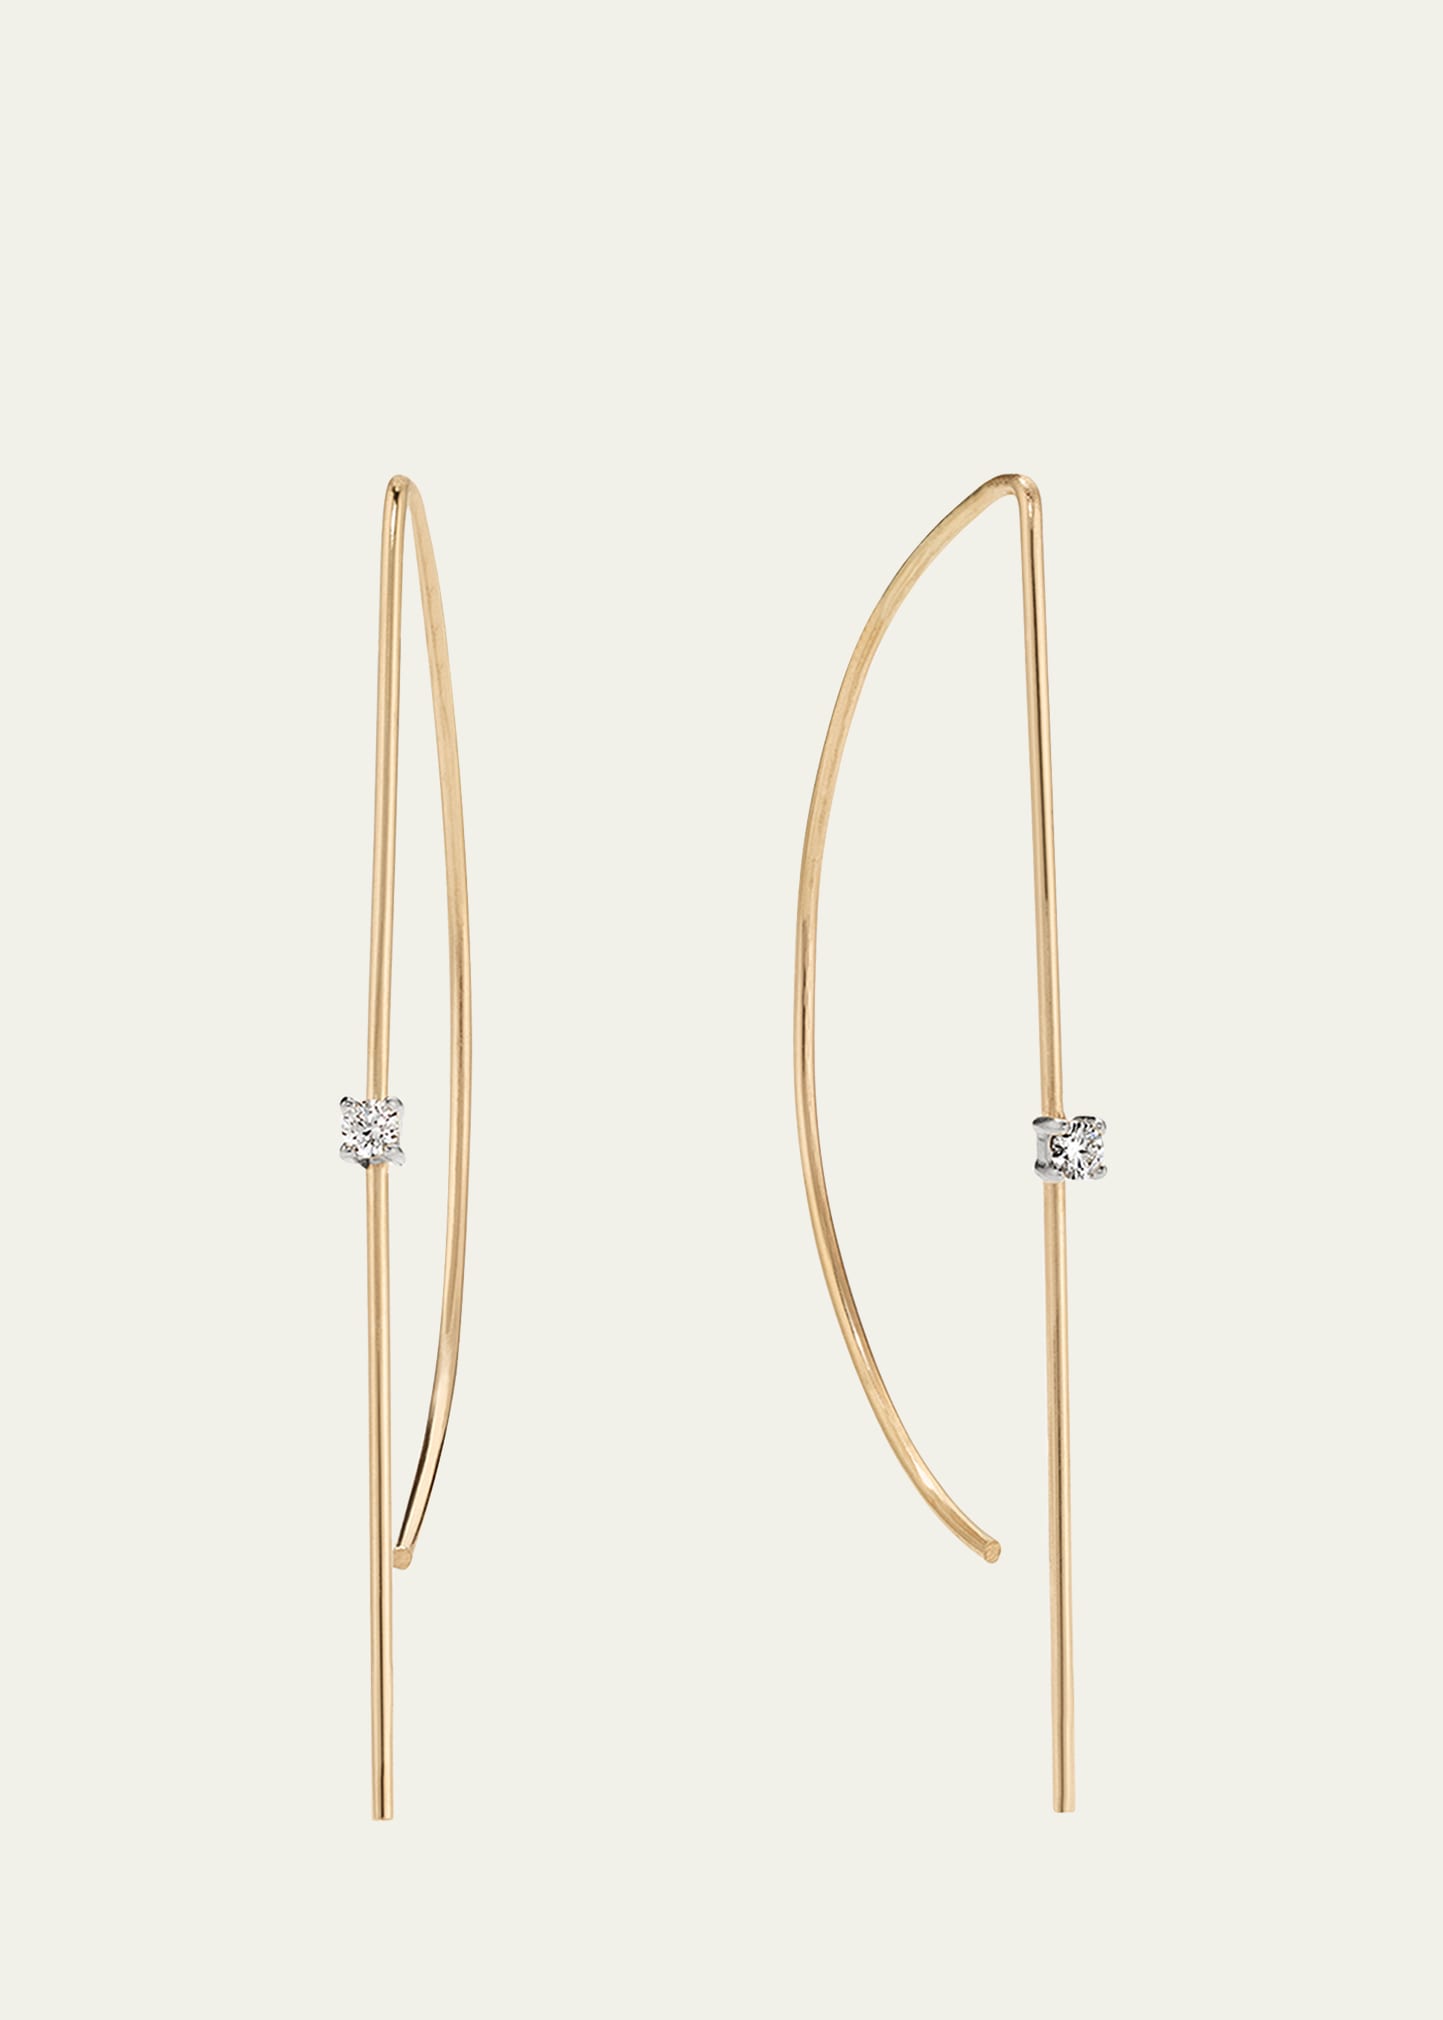 LANA 14K Yellow Gold Small Wire P Hoop Earrings with Diamonds